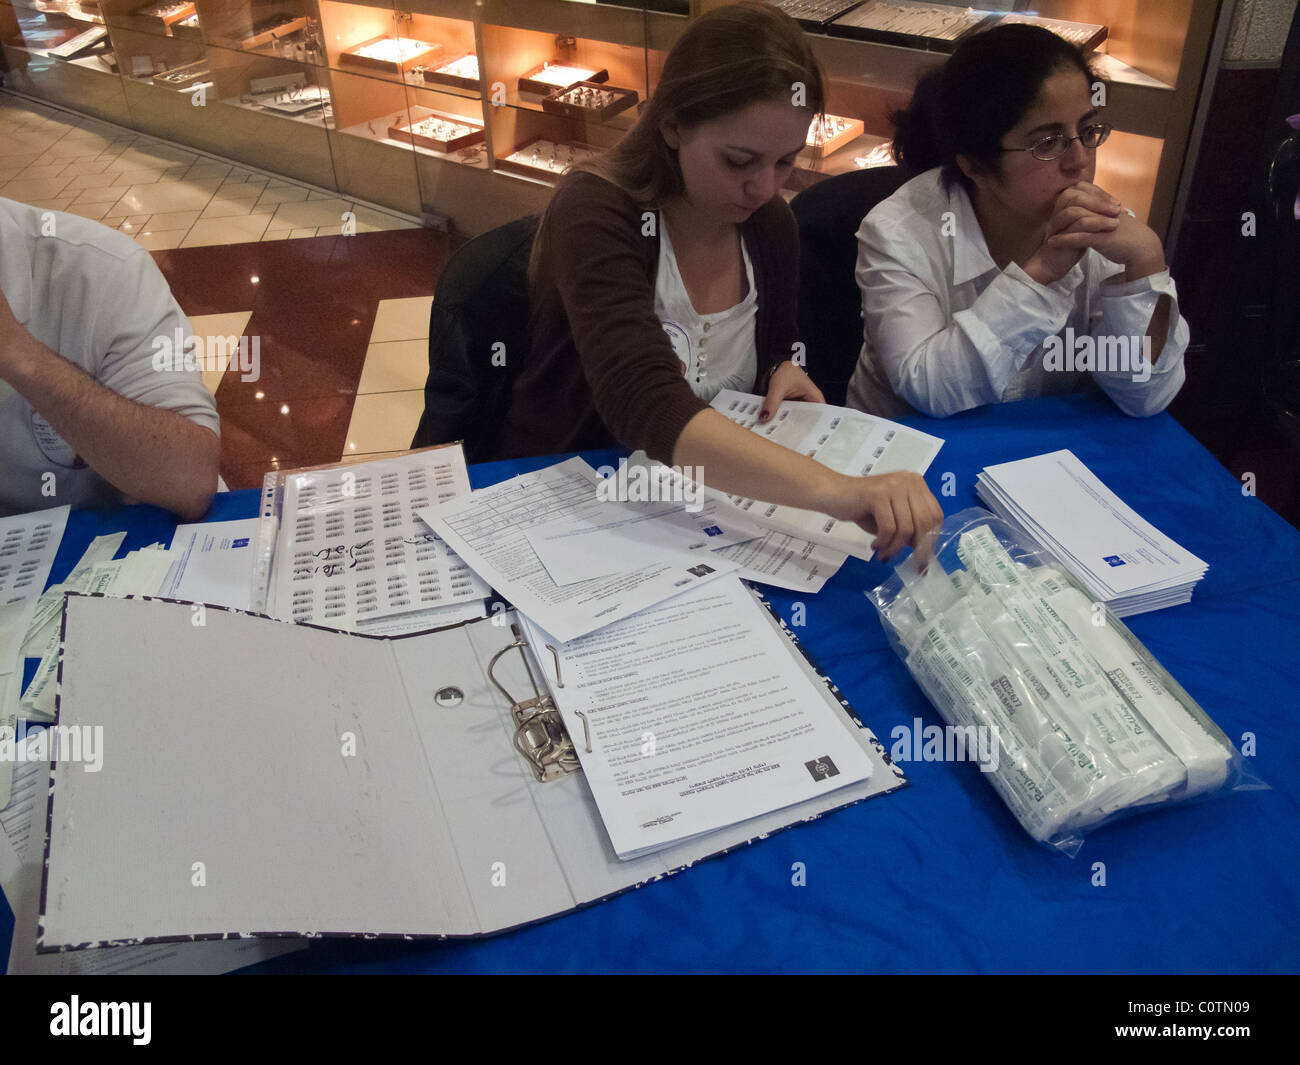 Shoppers across the country were asked today to give a saliva sample for bone marrow database. Jerusalem, Israel. 28/02/2011. Stock Photo